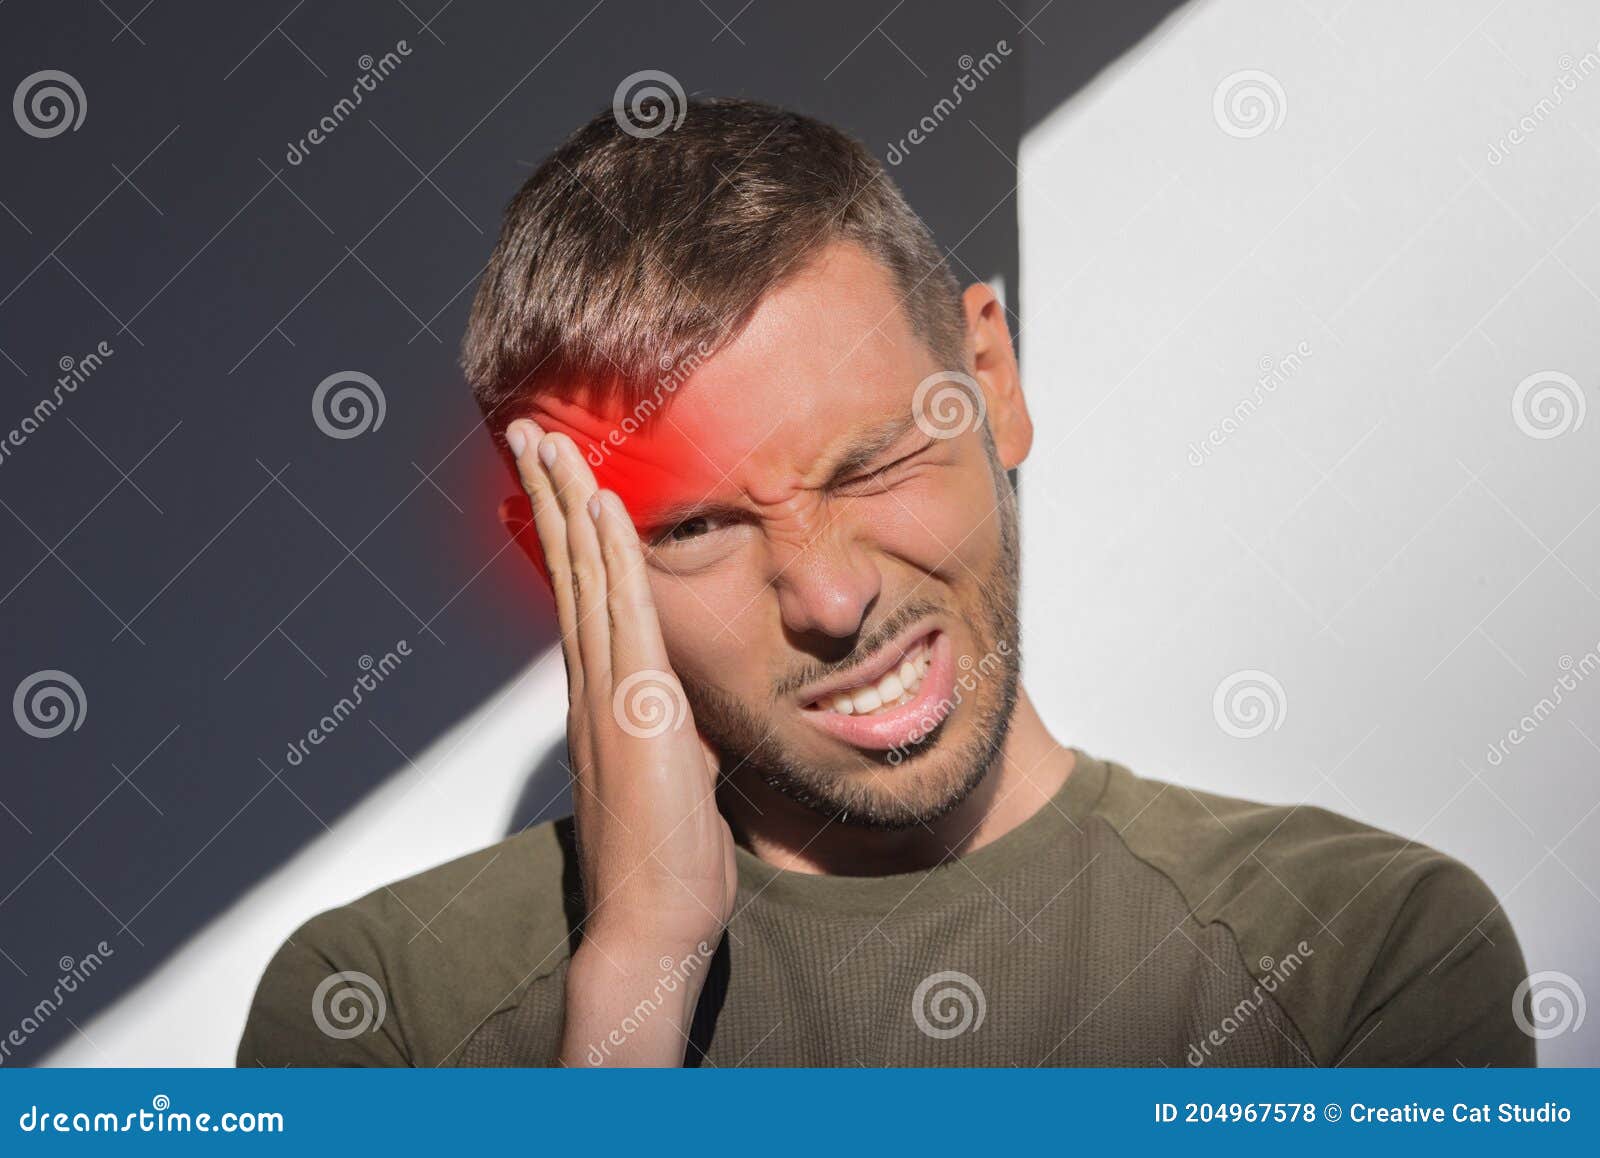 man touching his temple and having strong tension headache. cluster headache